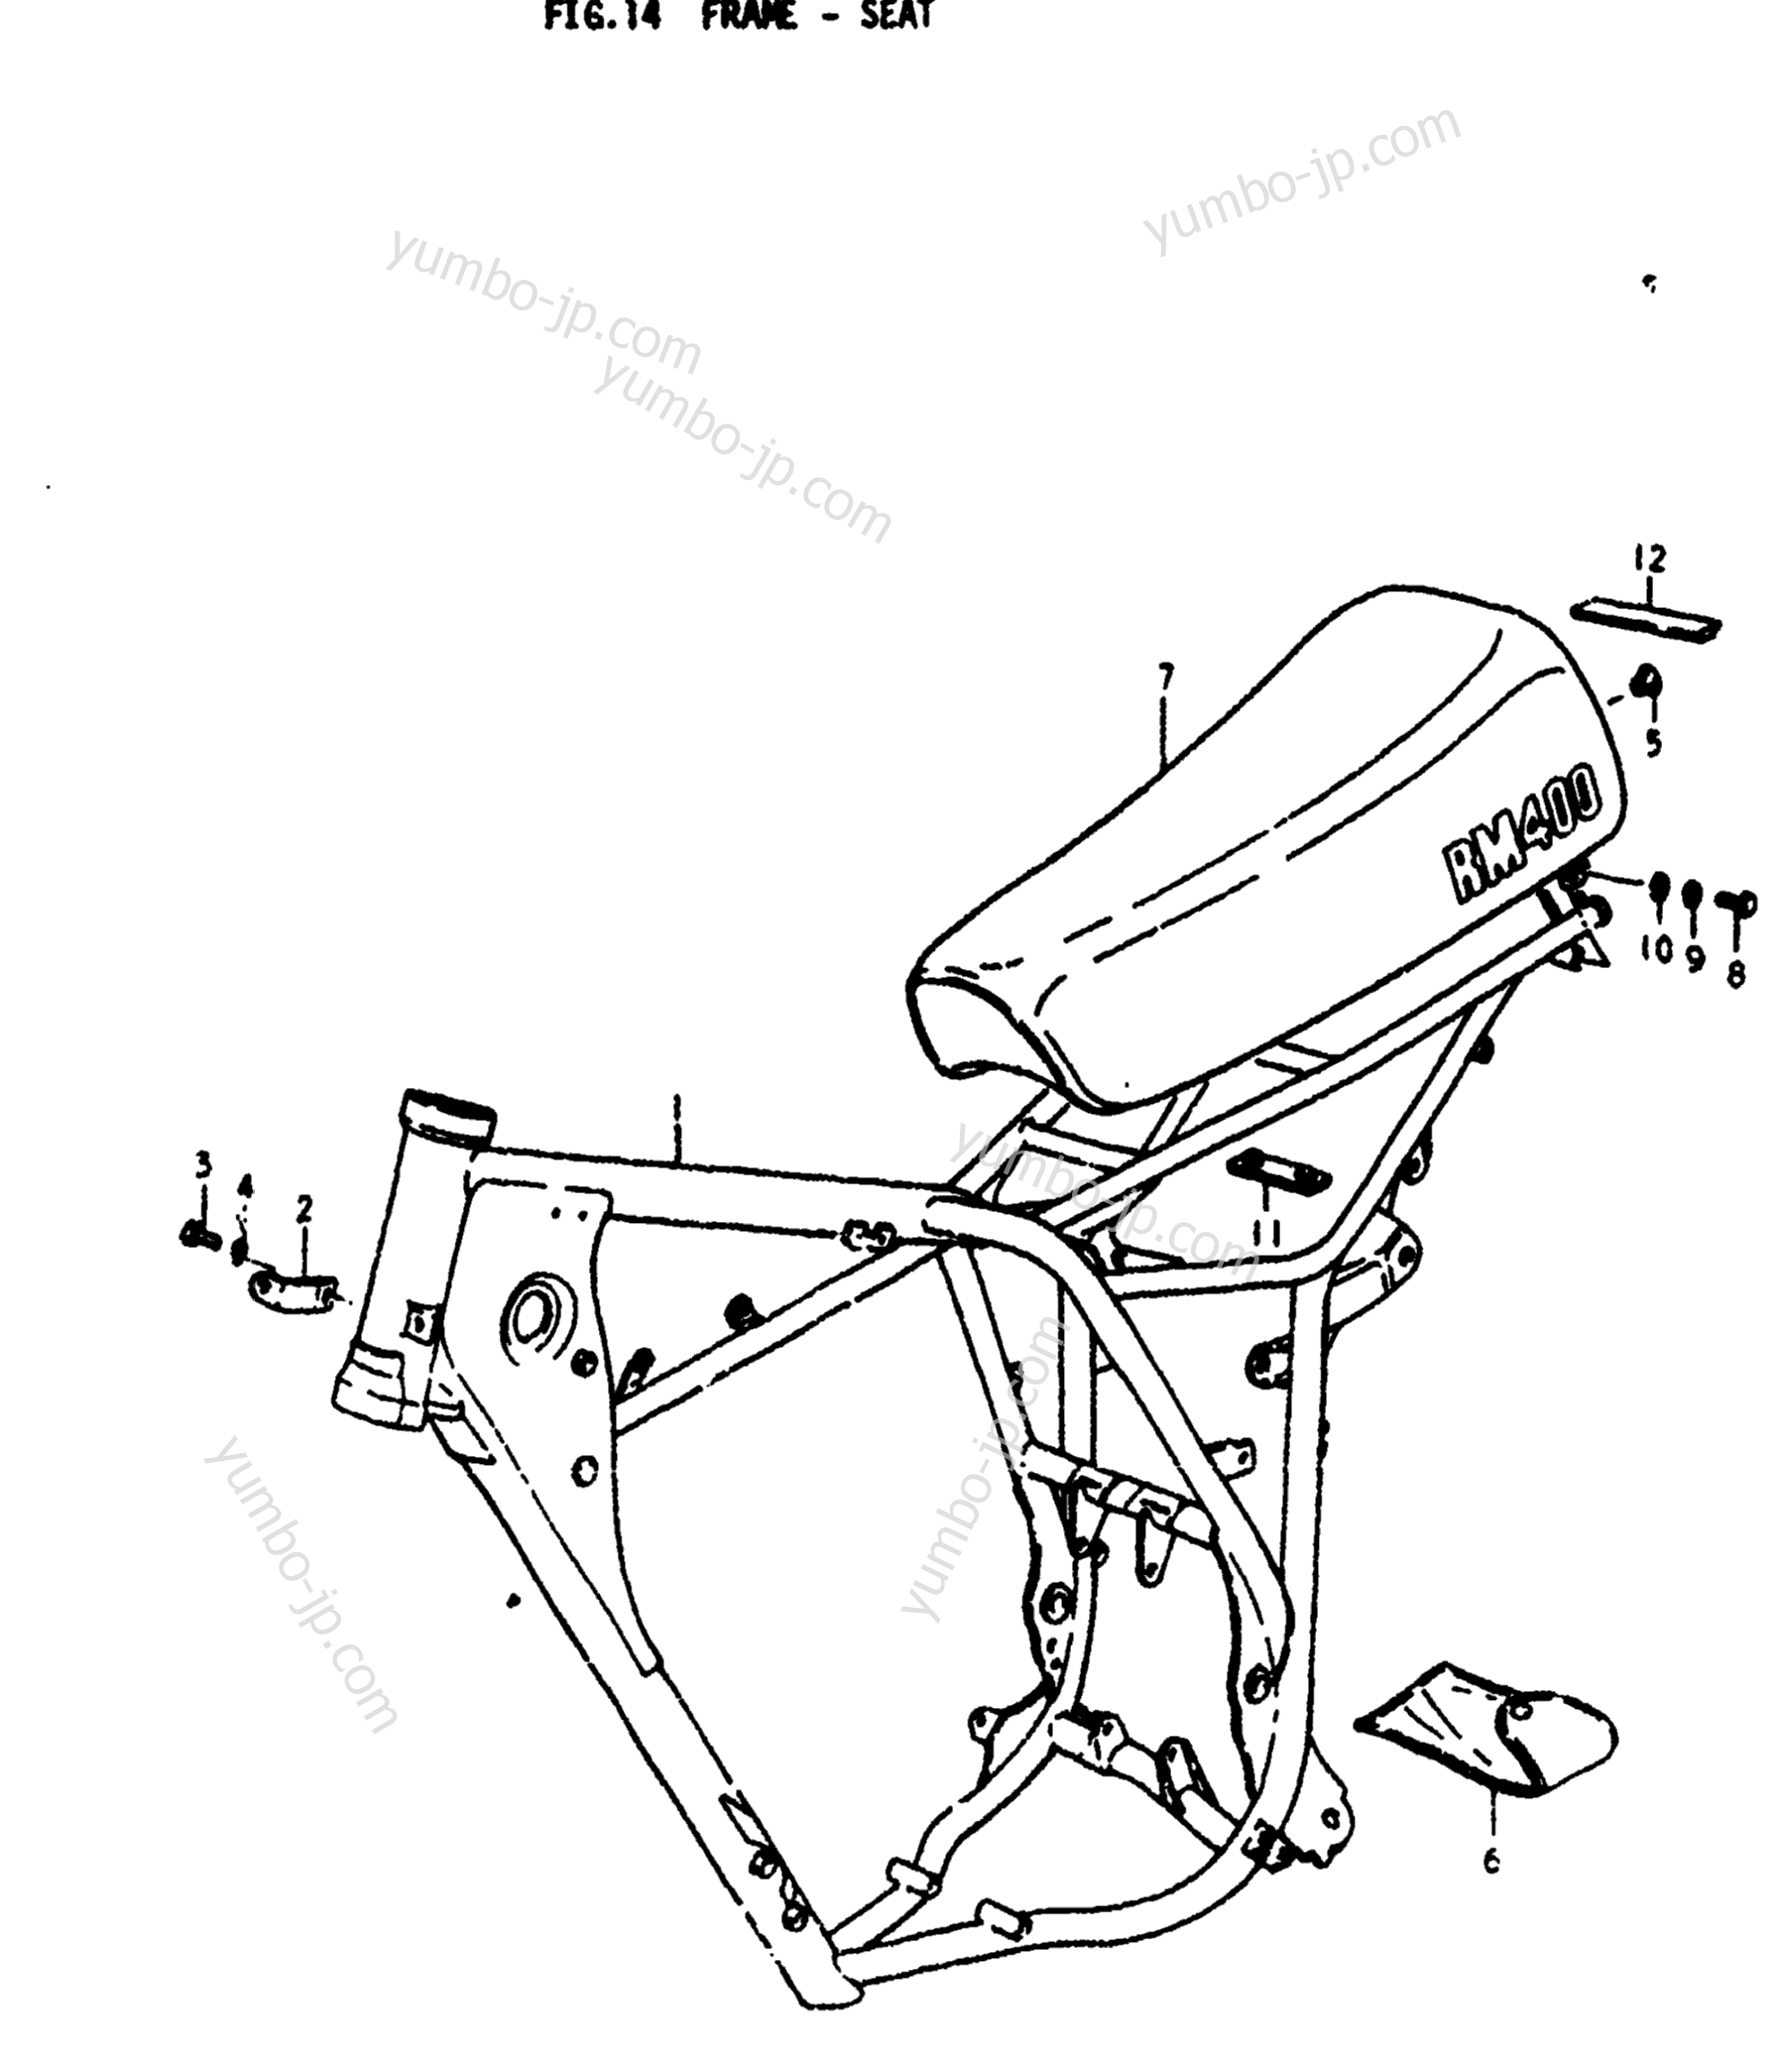 FRAME - SEAT for motorcycles SUZUKI RM400 1978 year